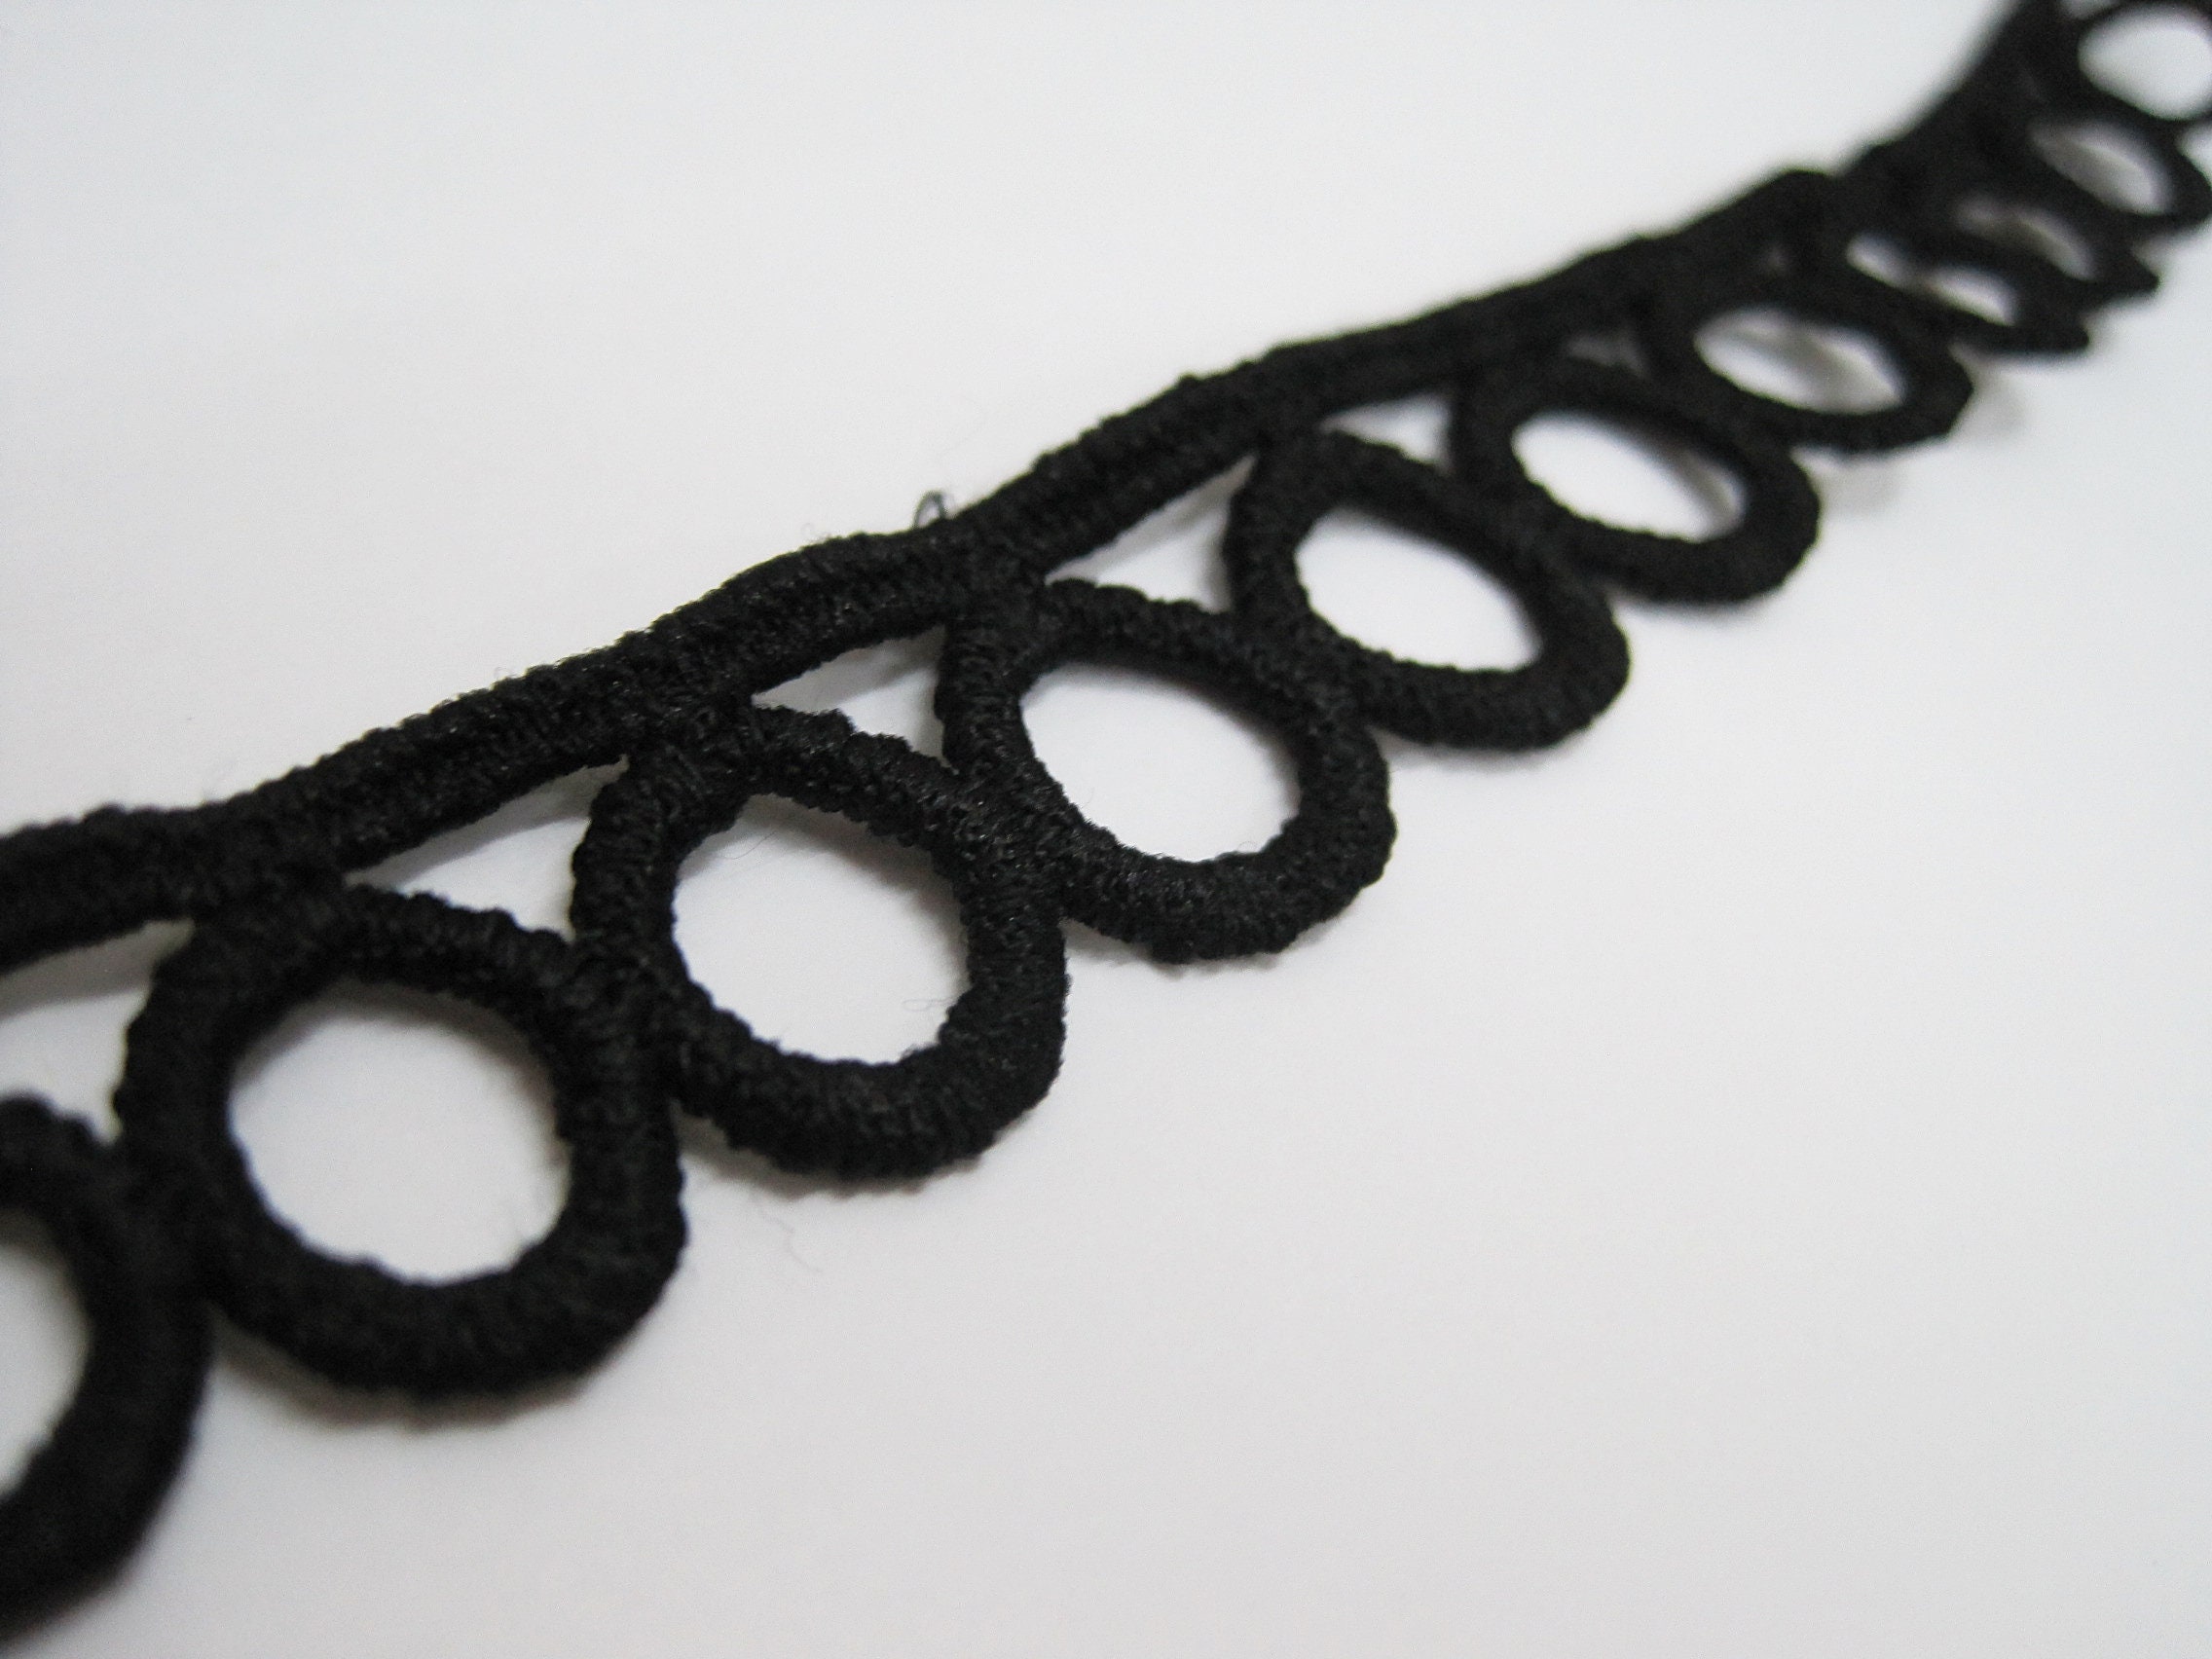 Buy 5 Yards Round Loop Lace, Black Trim, Black Lace Trim, Loop Trim, Chain  Trim, Black Loop Trim, Black Ribbon Lace, Circle Lace, Black Lace Online in  India 